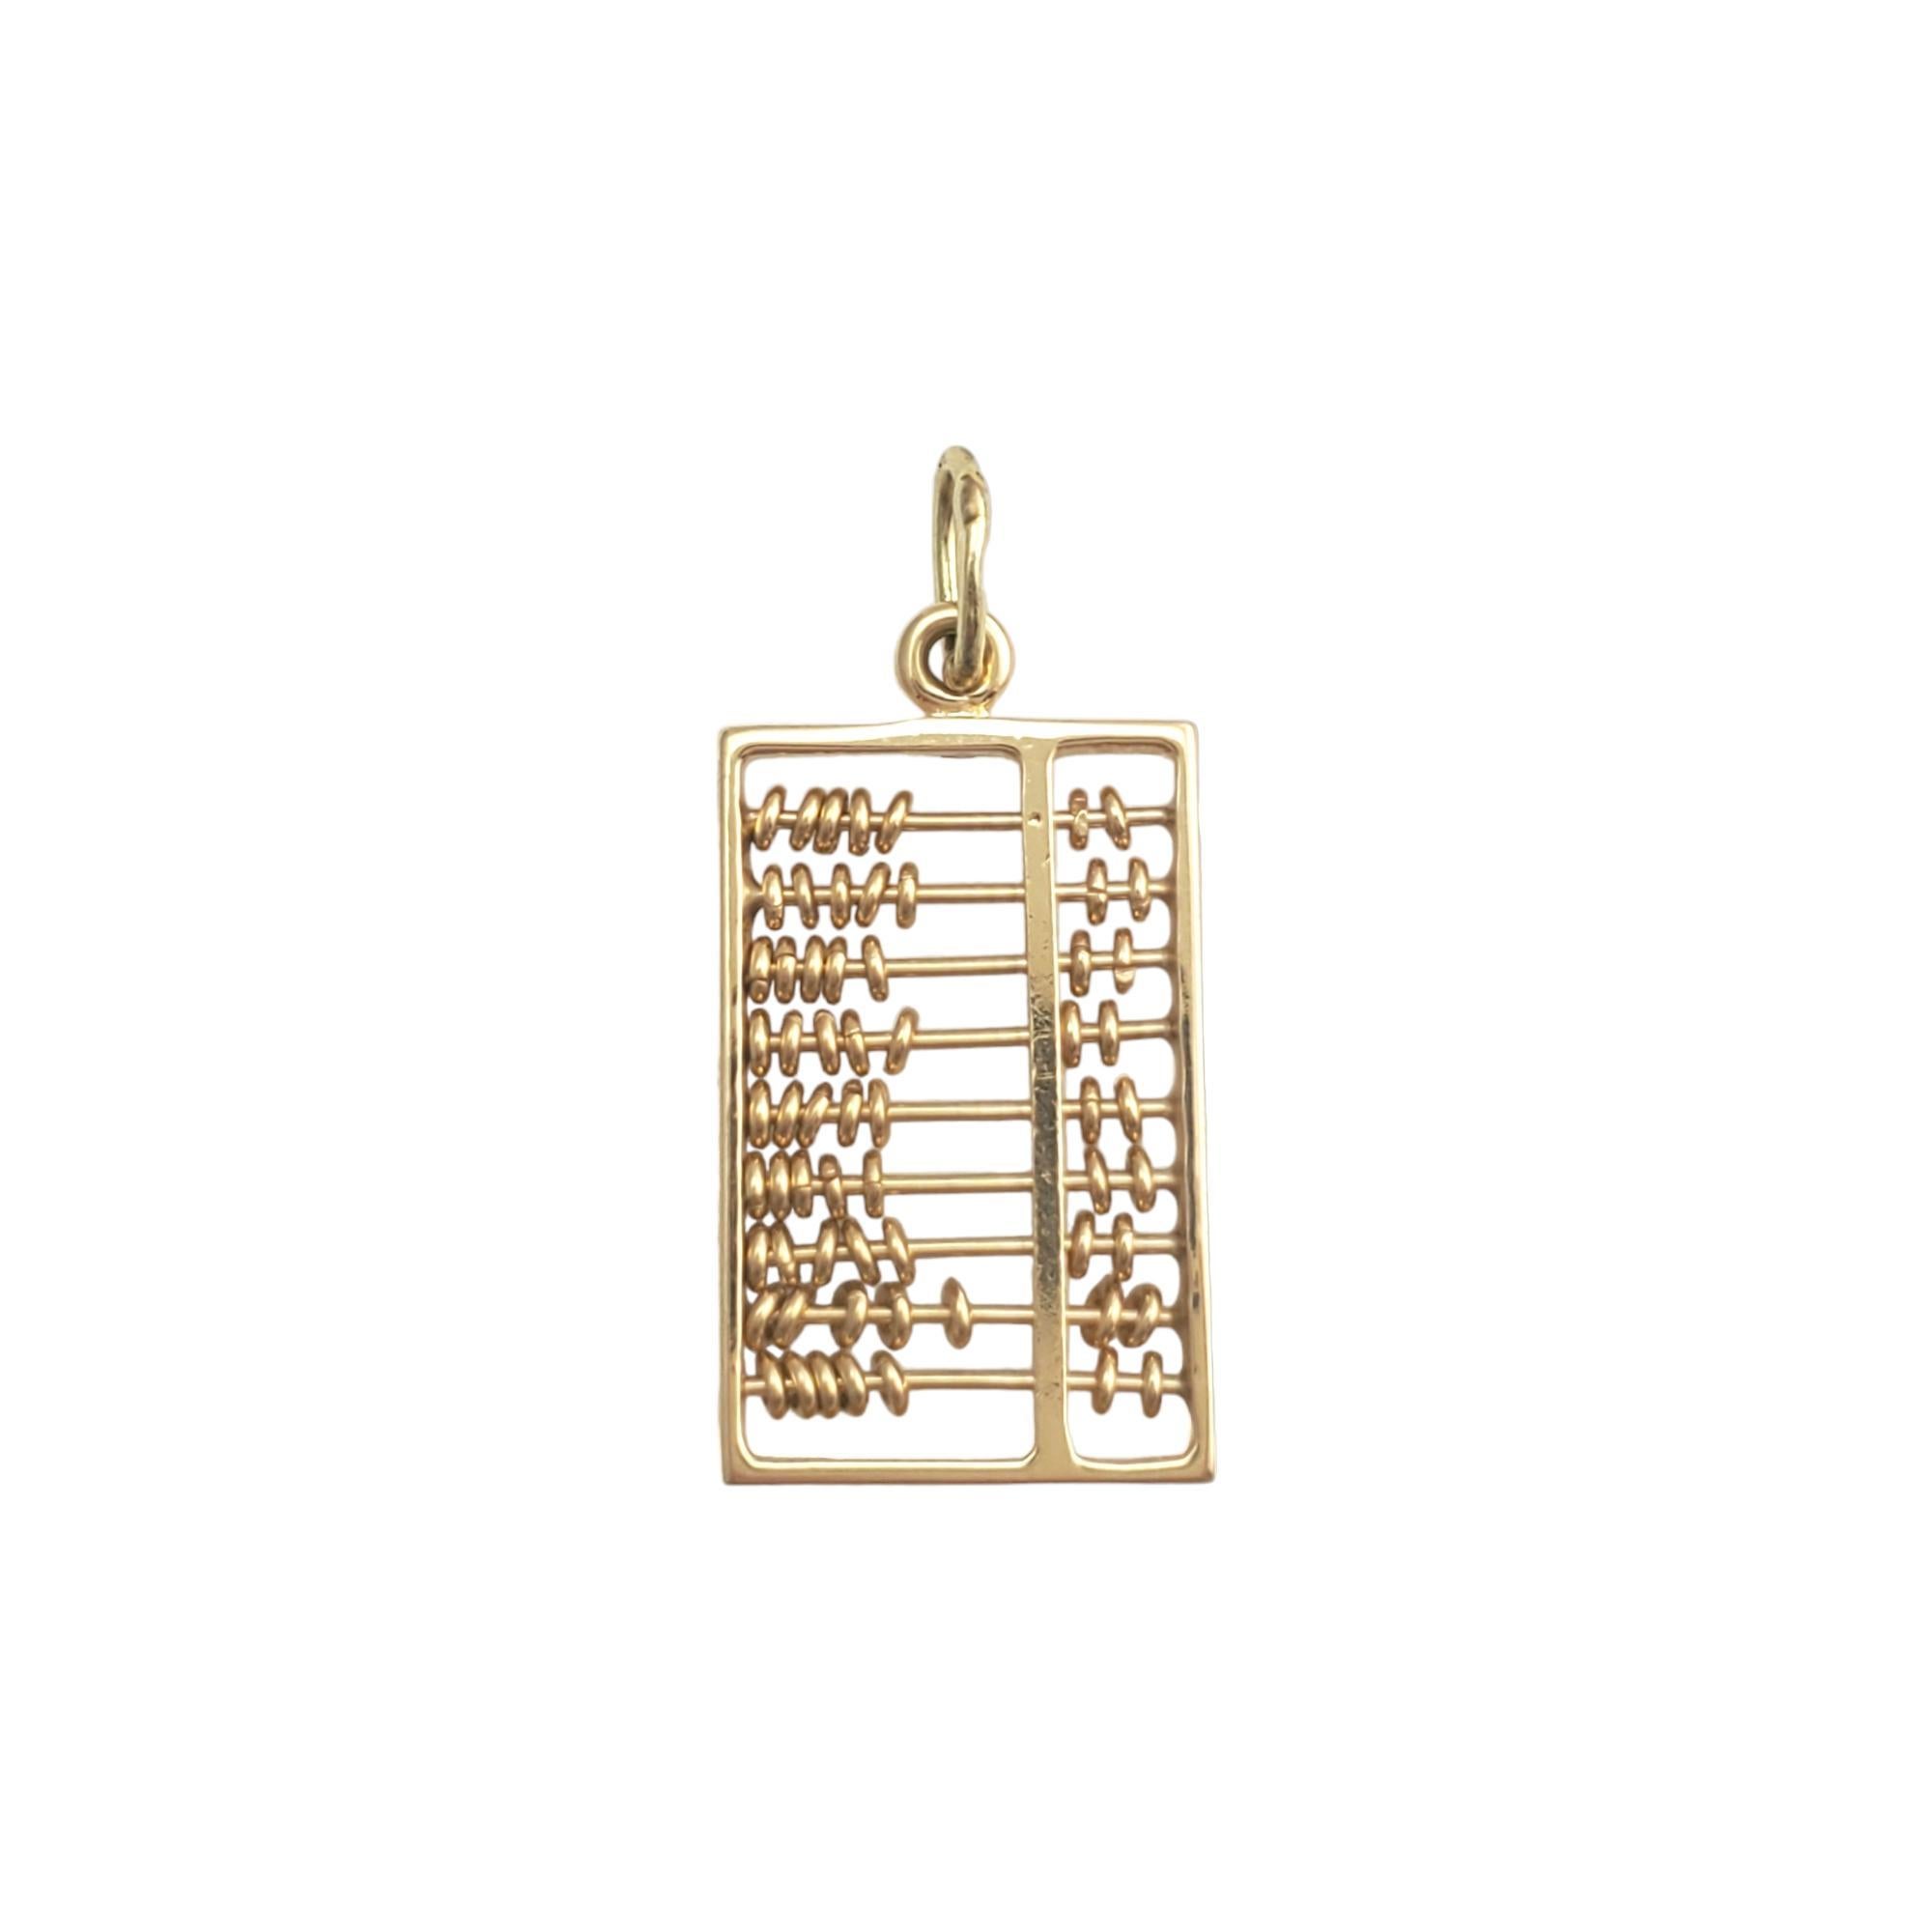 Vintage 14 karat yellow gold abacus pendant -

This lovely abacus pendant is a timeless charm of tradition and style and is set in beautifully detailed 14K yellow gold.

Size: 22.54mm x 13mm

Stamped: 14K

Weight: 2.55gr./ 1.63 dwt.

Chain not